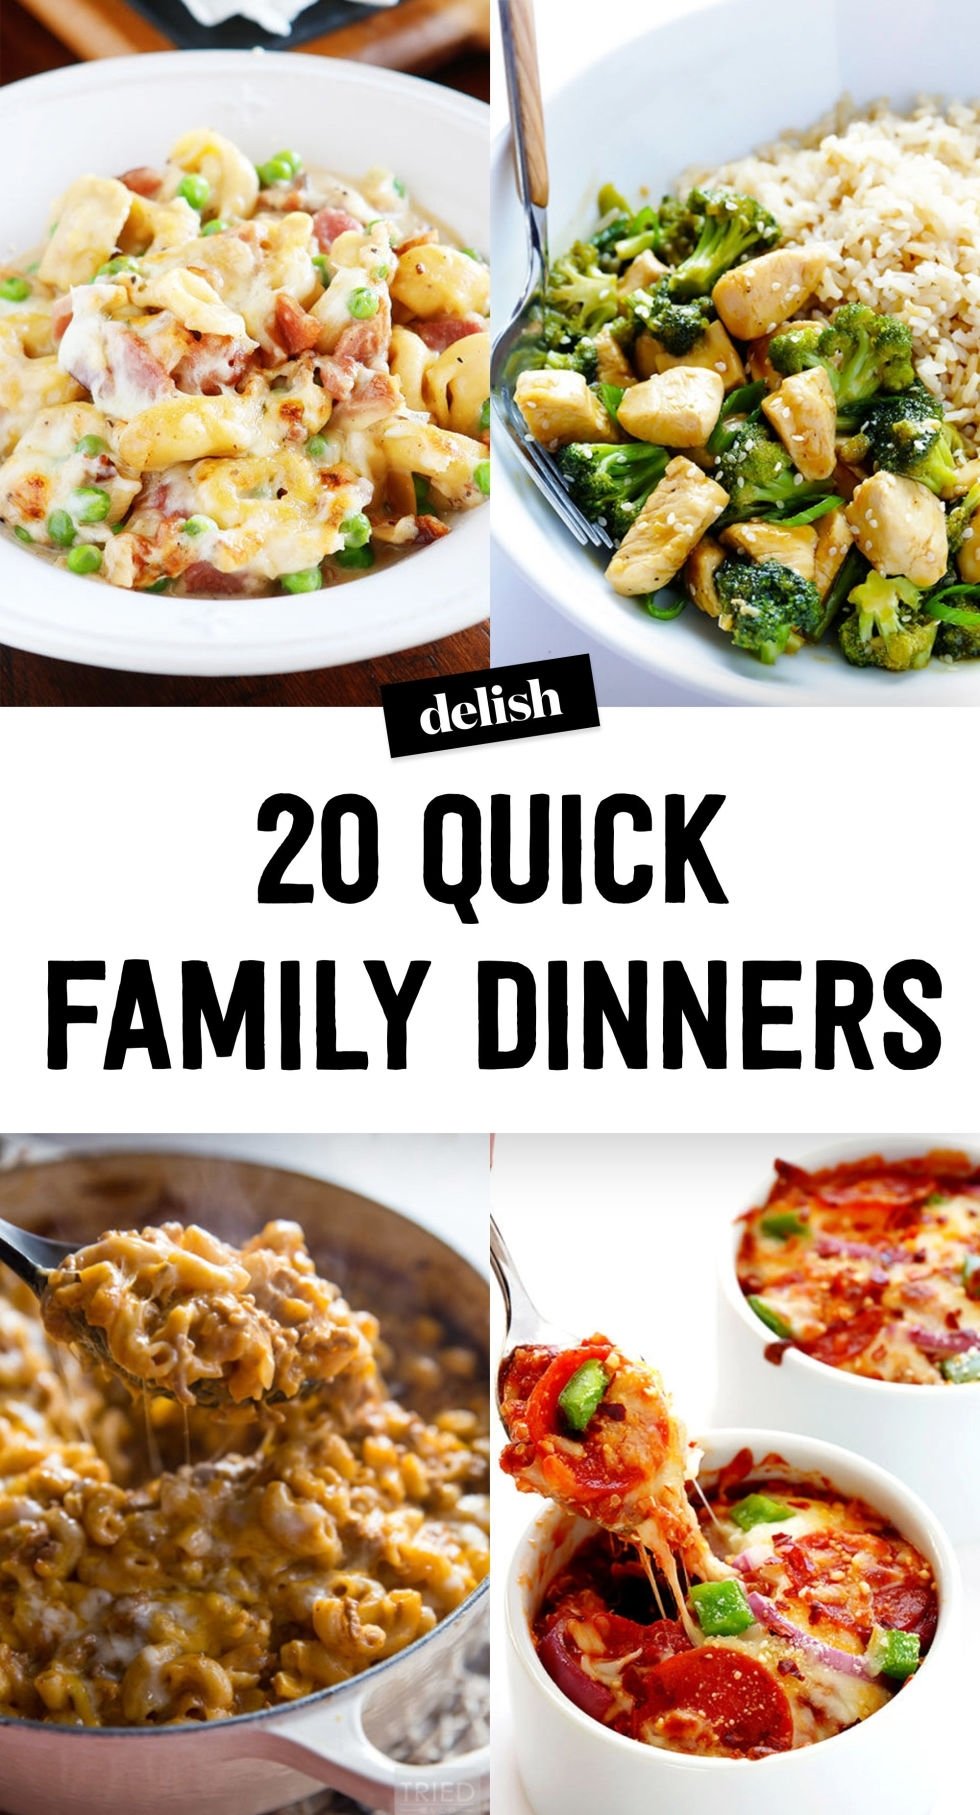 10 Pretty Cheap And Fast Dinner Ideas download easy fast dinner recipes for family food photos 4 2022